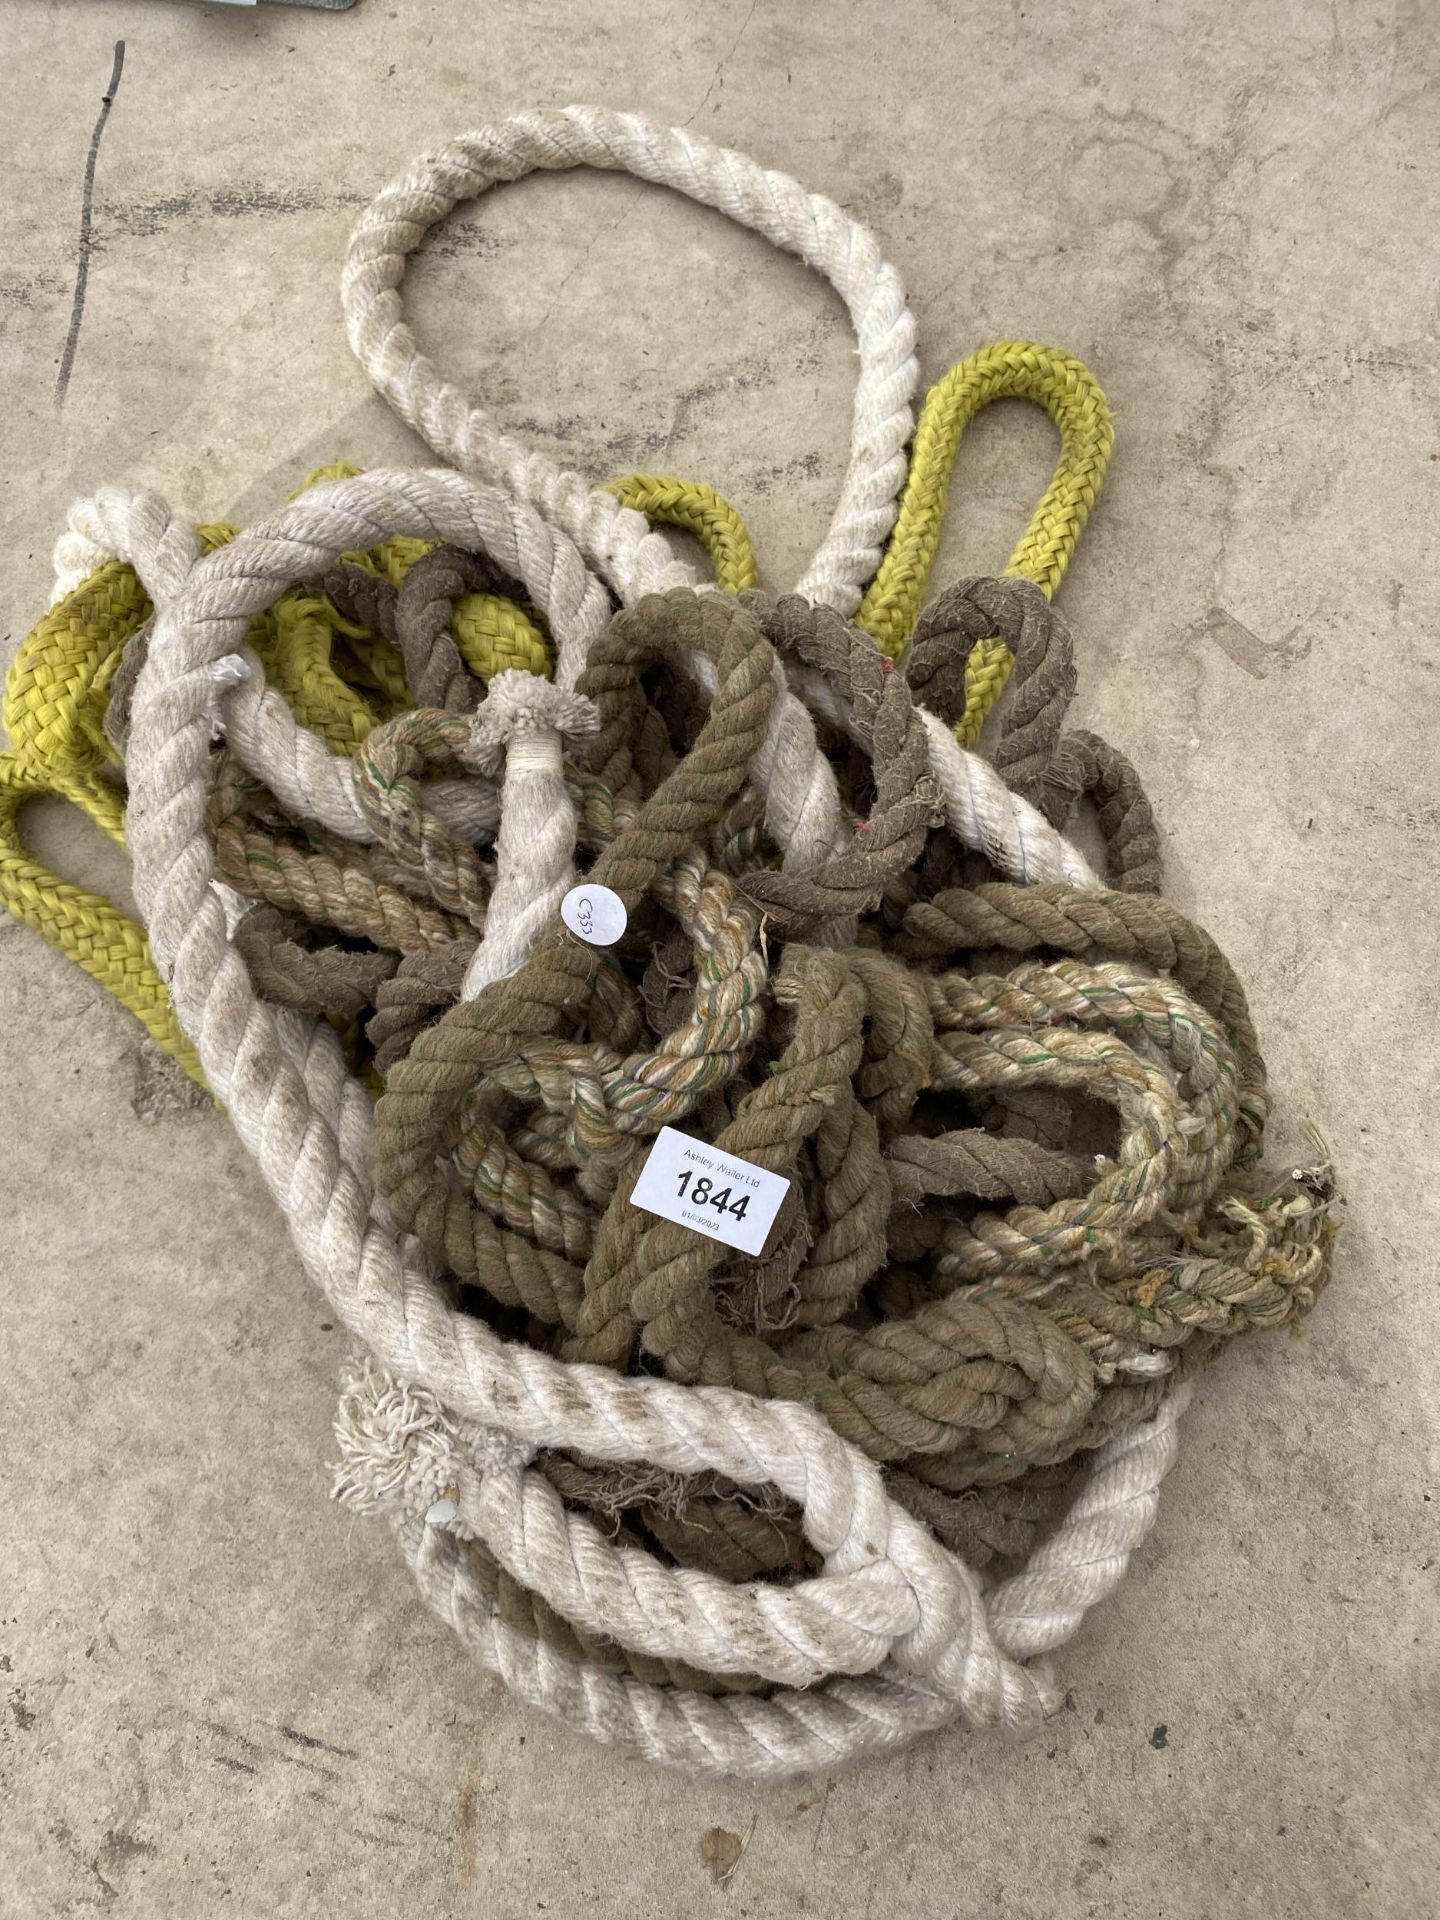 AN ASSORTMENT OF ROPE HALTERS